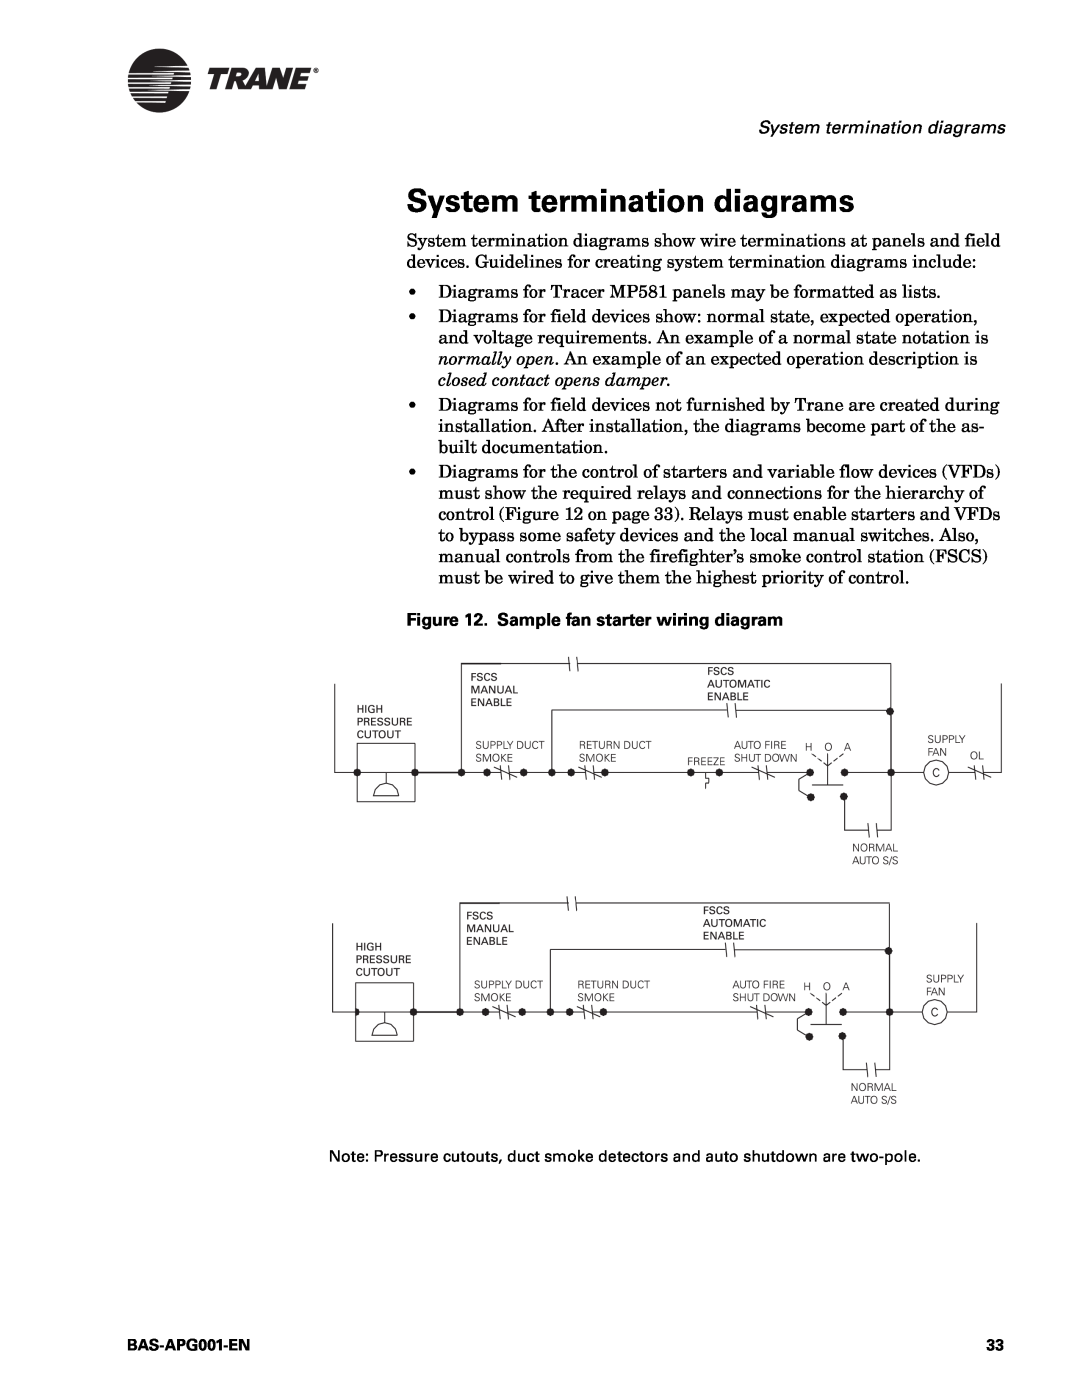 Trane Engineered Smoke Control System for Tracer Summit System termination diagrams, Sample fan starter wiring diagram 